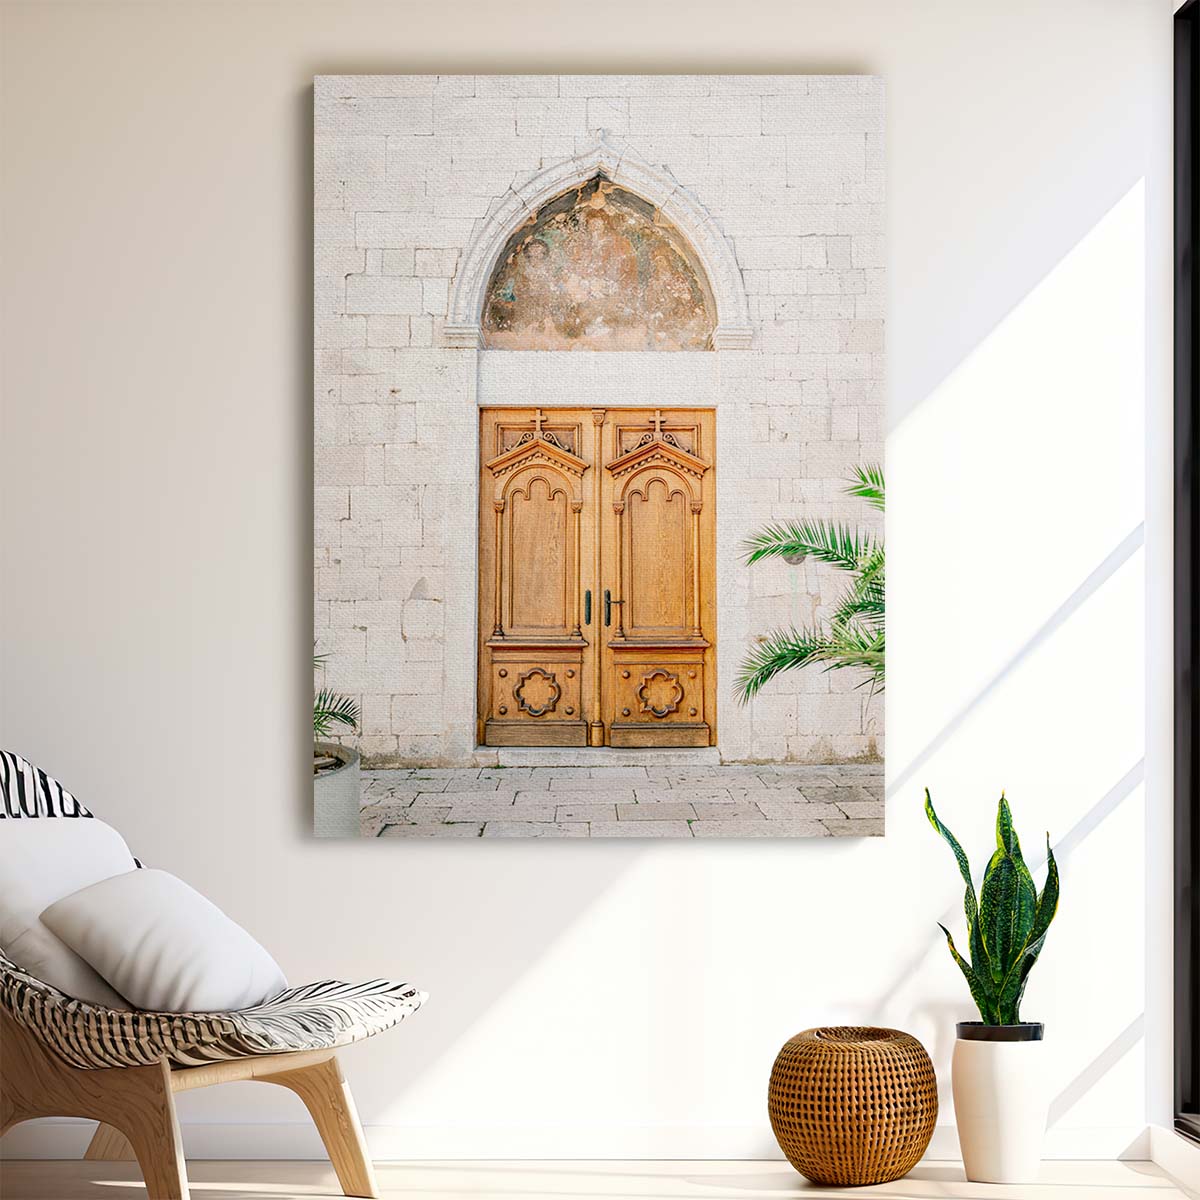 Croatian Church Doorway Photography, Beige Summer Cityscape Wall Art by Luxuriance Designs, made in USA